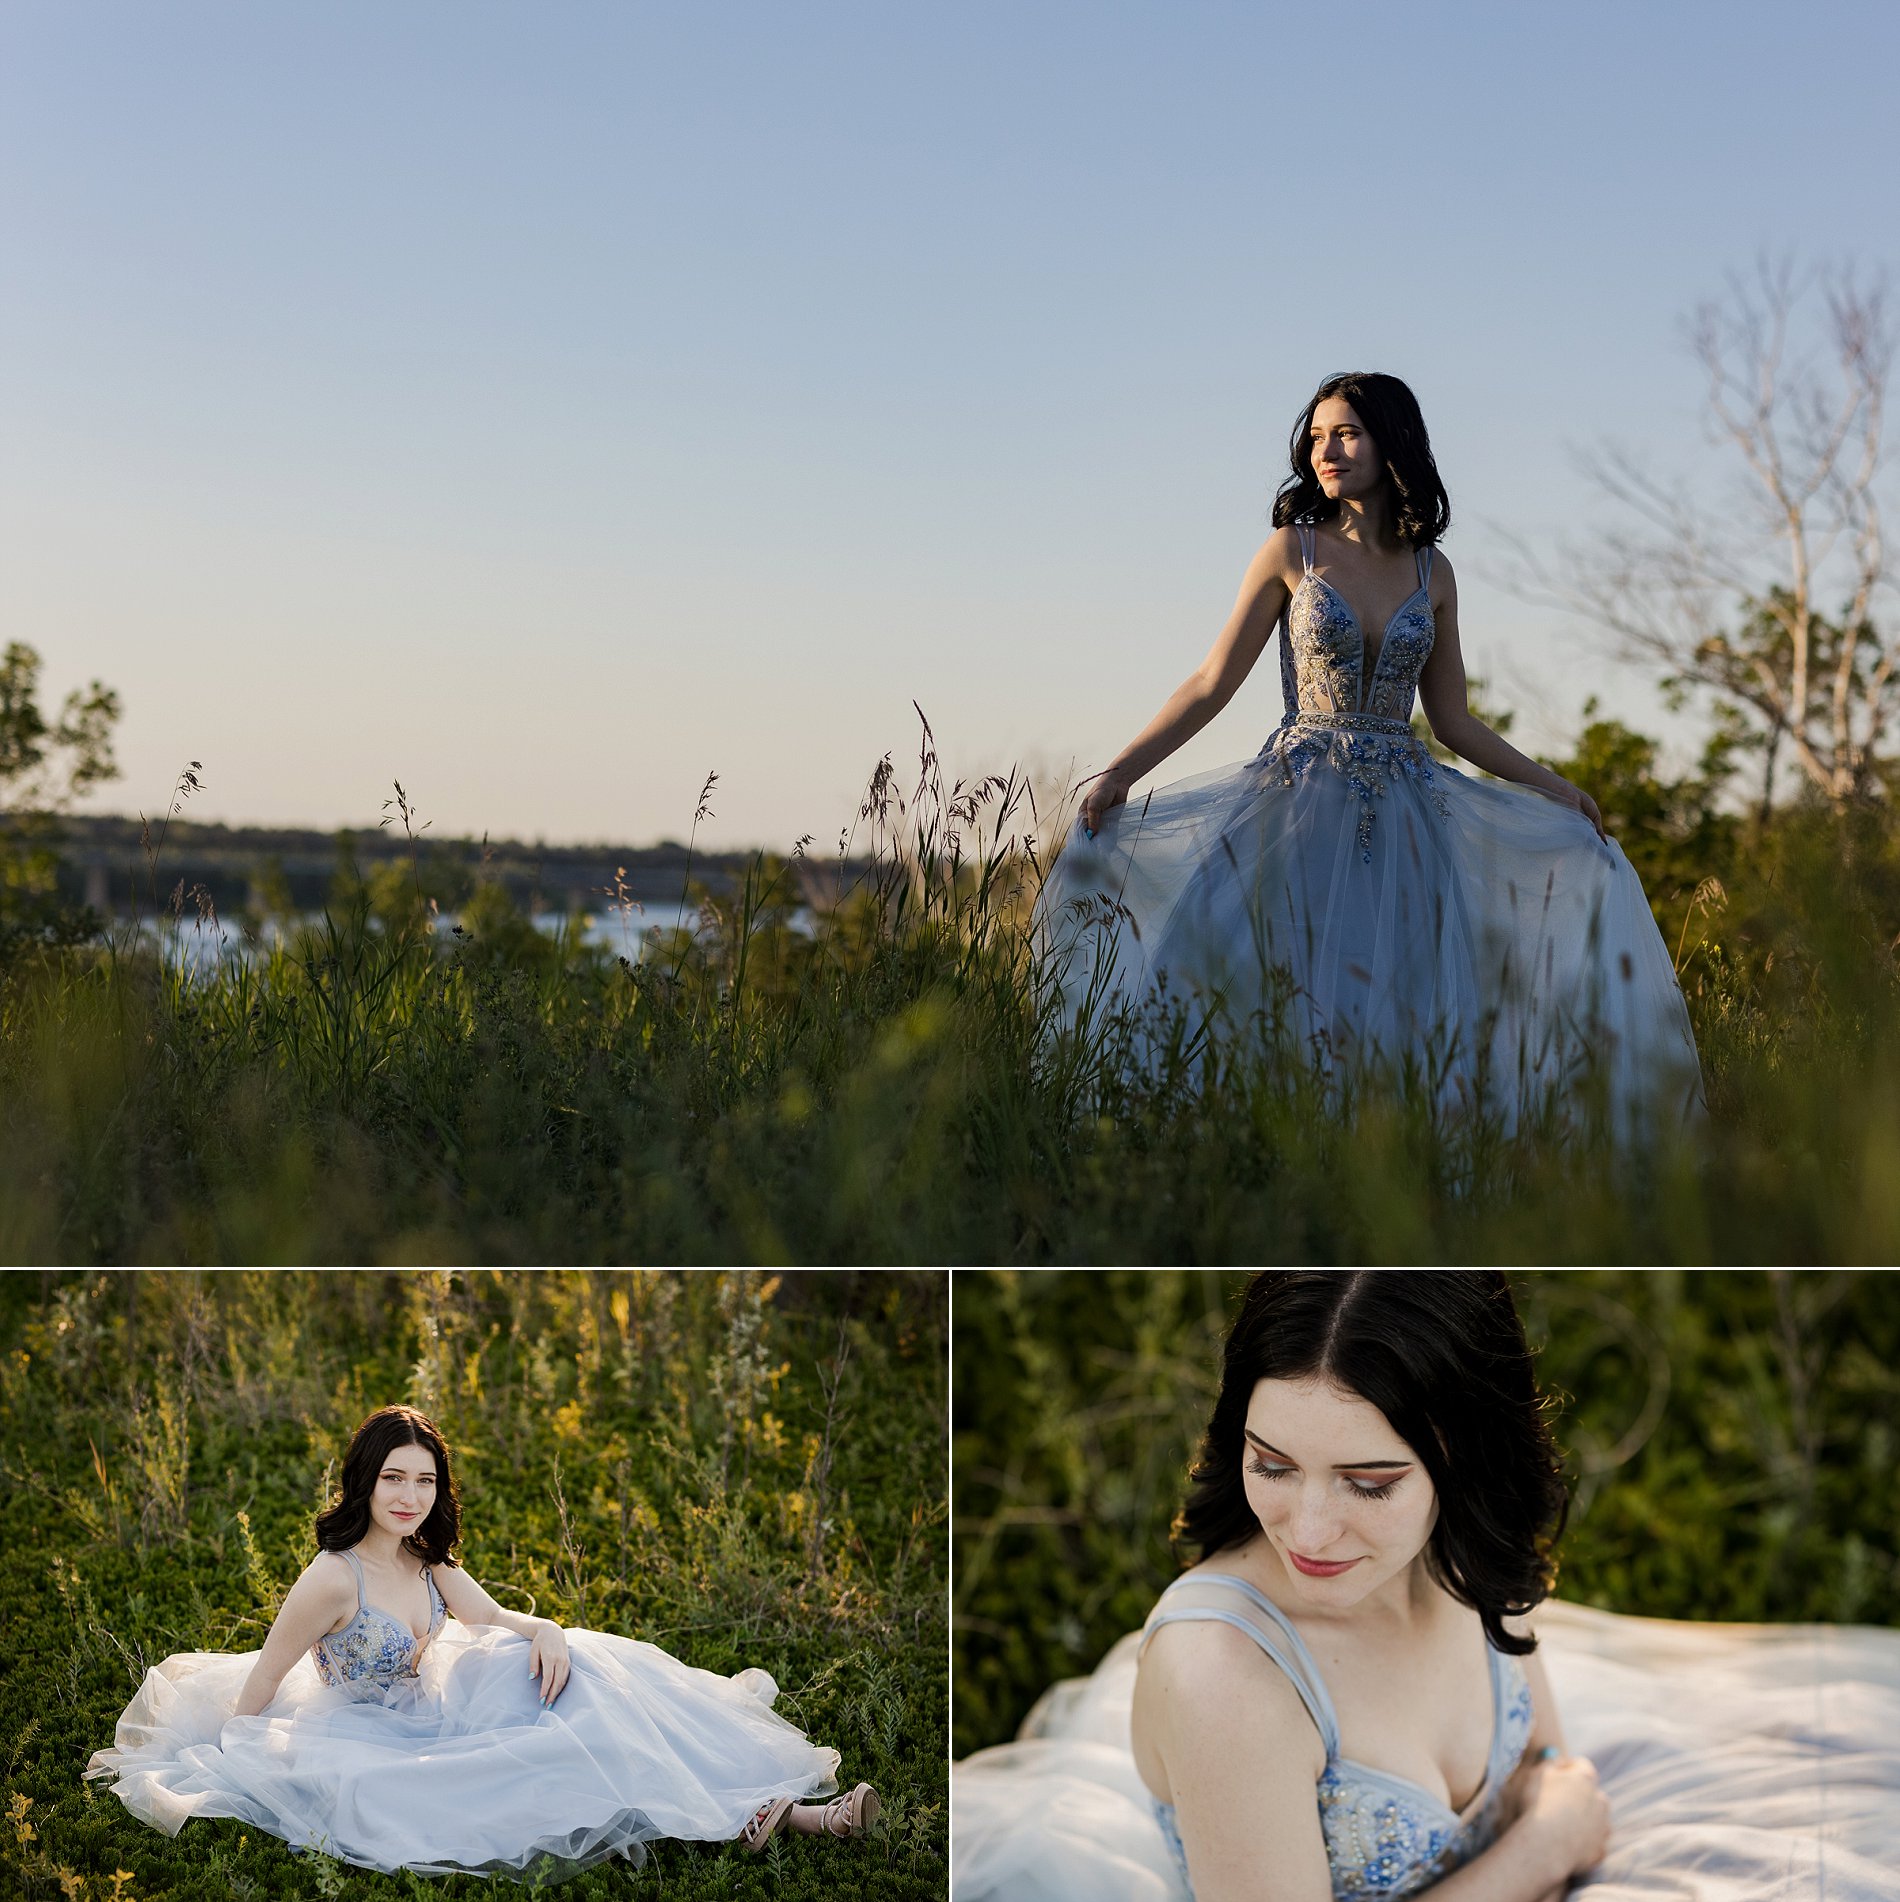 High school graduate in blue dress in a field of weeds against a blue sky by the river in Saskatoon.